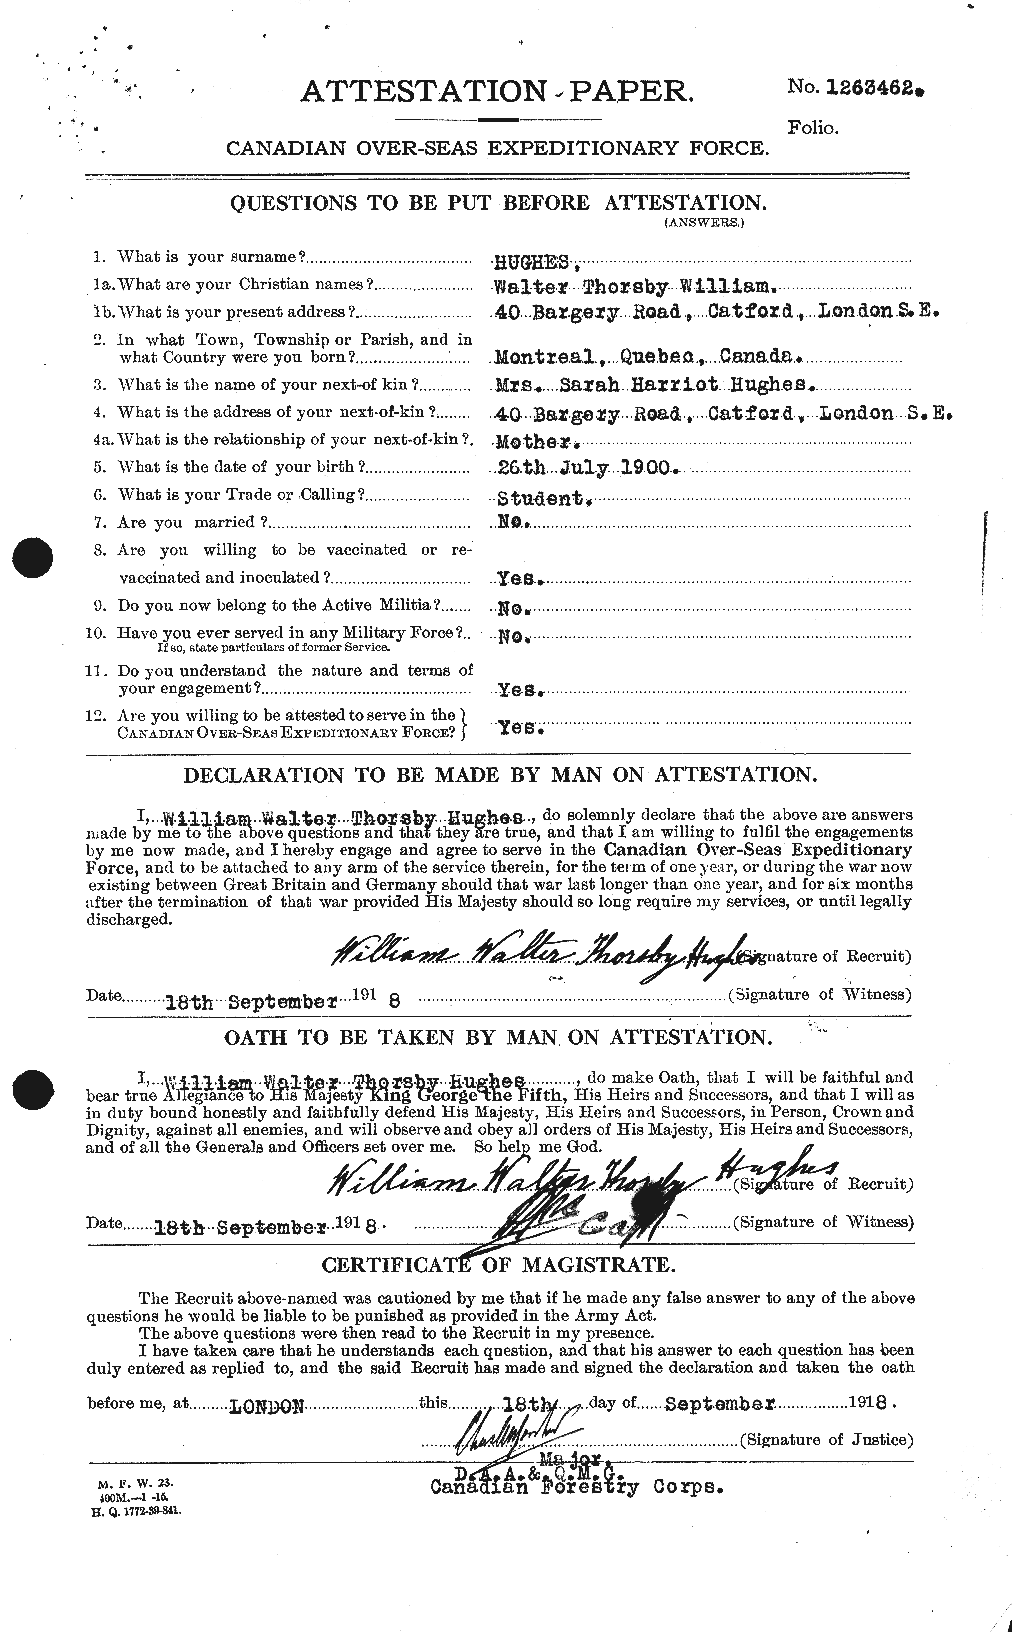 Personnel Records of the First World War - CEF 405864a